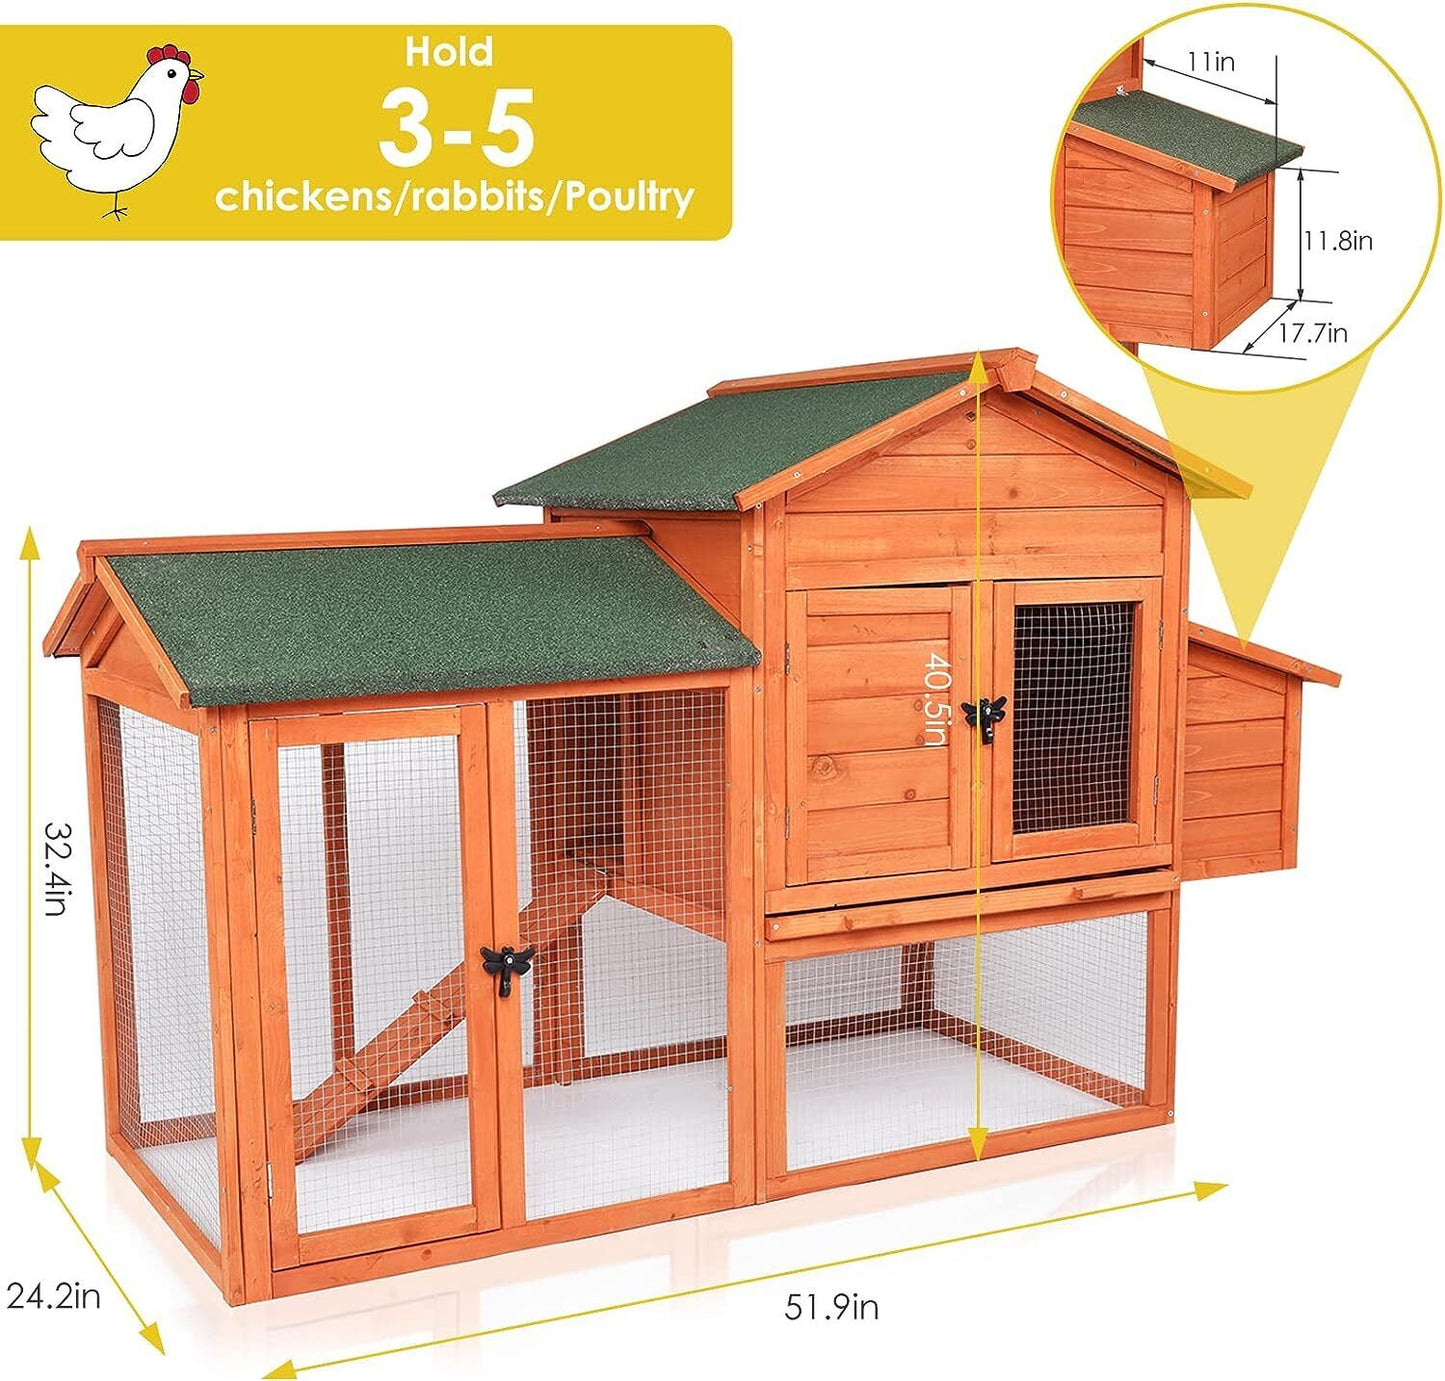 Arlopu 65" Chicken Coop, Outdoor Wooden Moveable Poultry Cage, Multi-Level Hen House w/Ramp, Run, Nesting Box, Removable Tray, Wire Fence&Weatherproof Asphalt roof, for Yard Farm Use, Chick & Rabbit